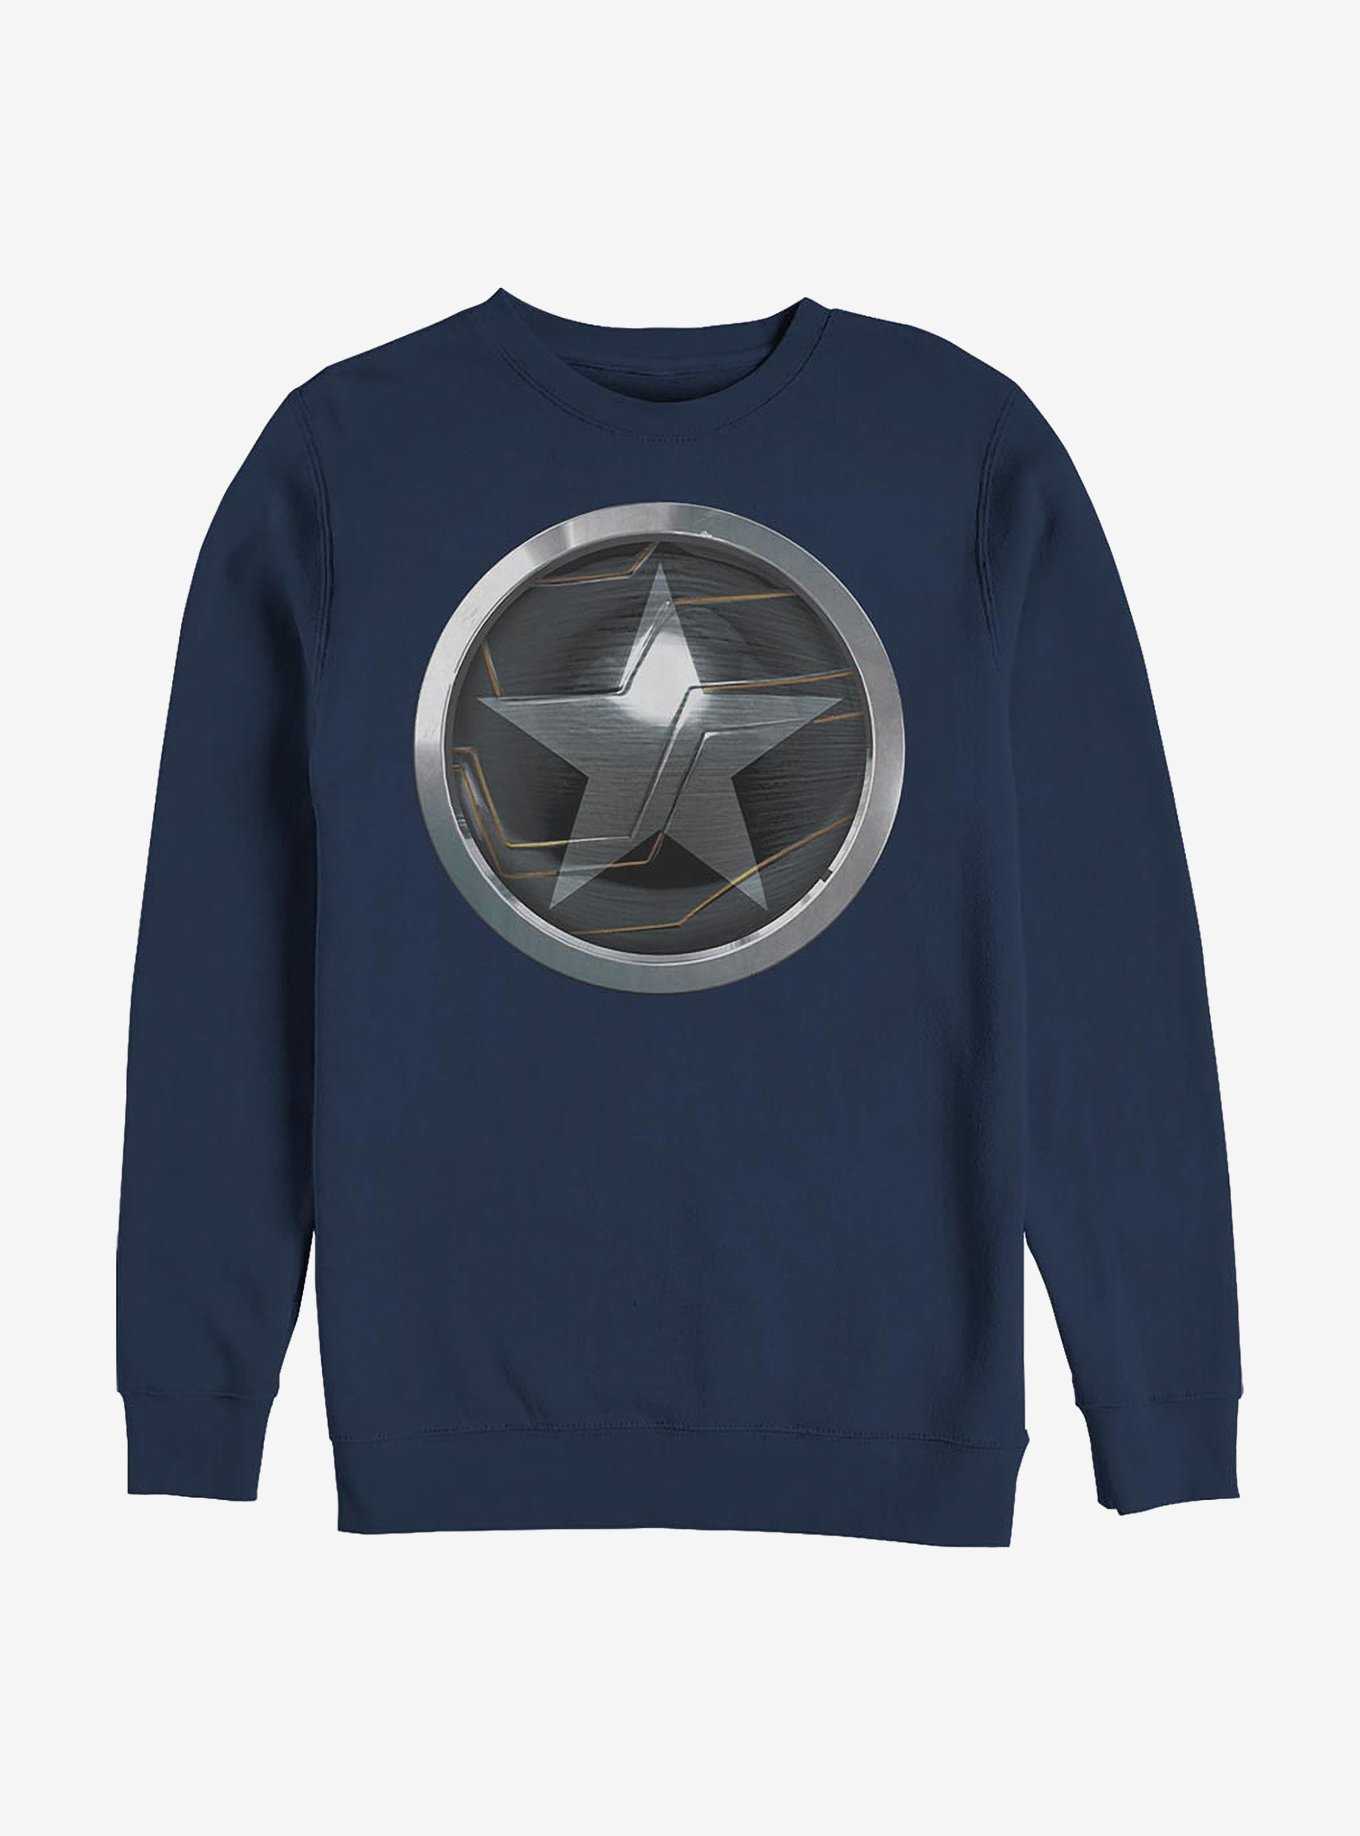 Marvel The Falcon And The Winter Soldier Soldier Logo Sweatshirt, , hi-res